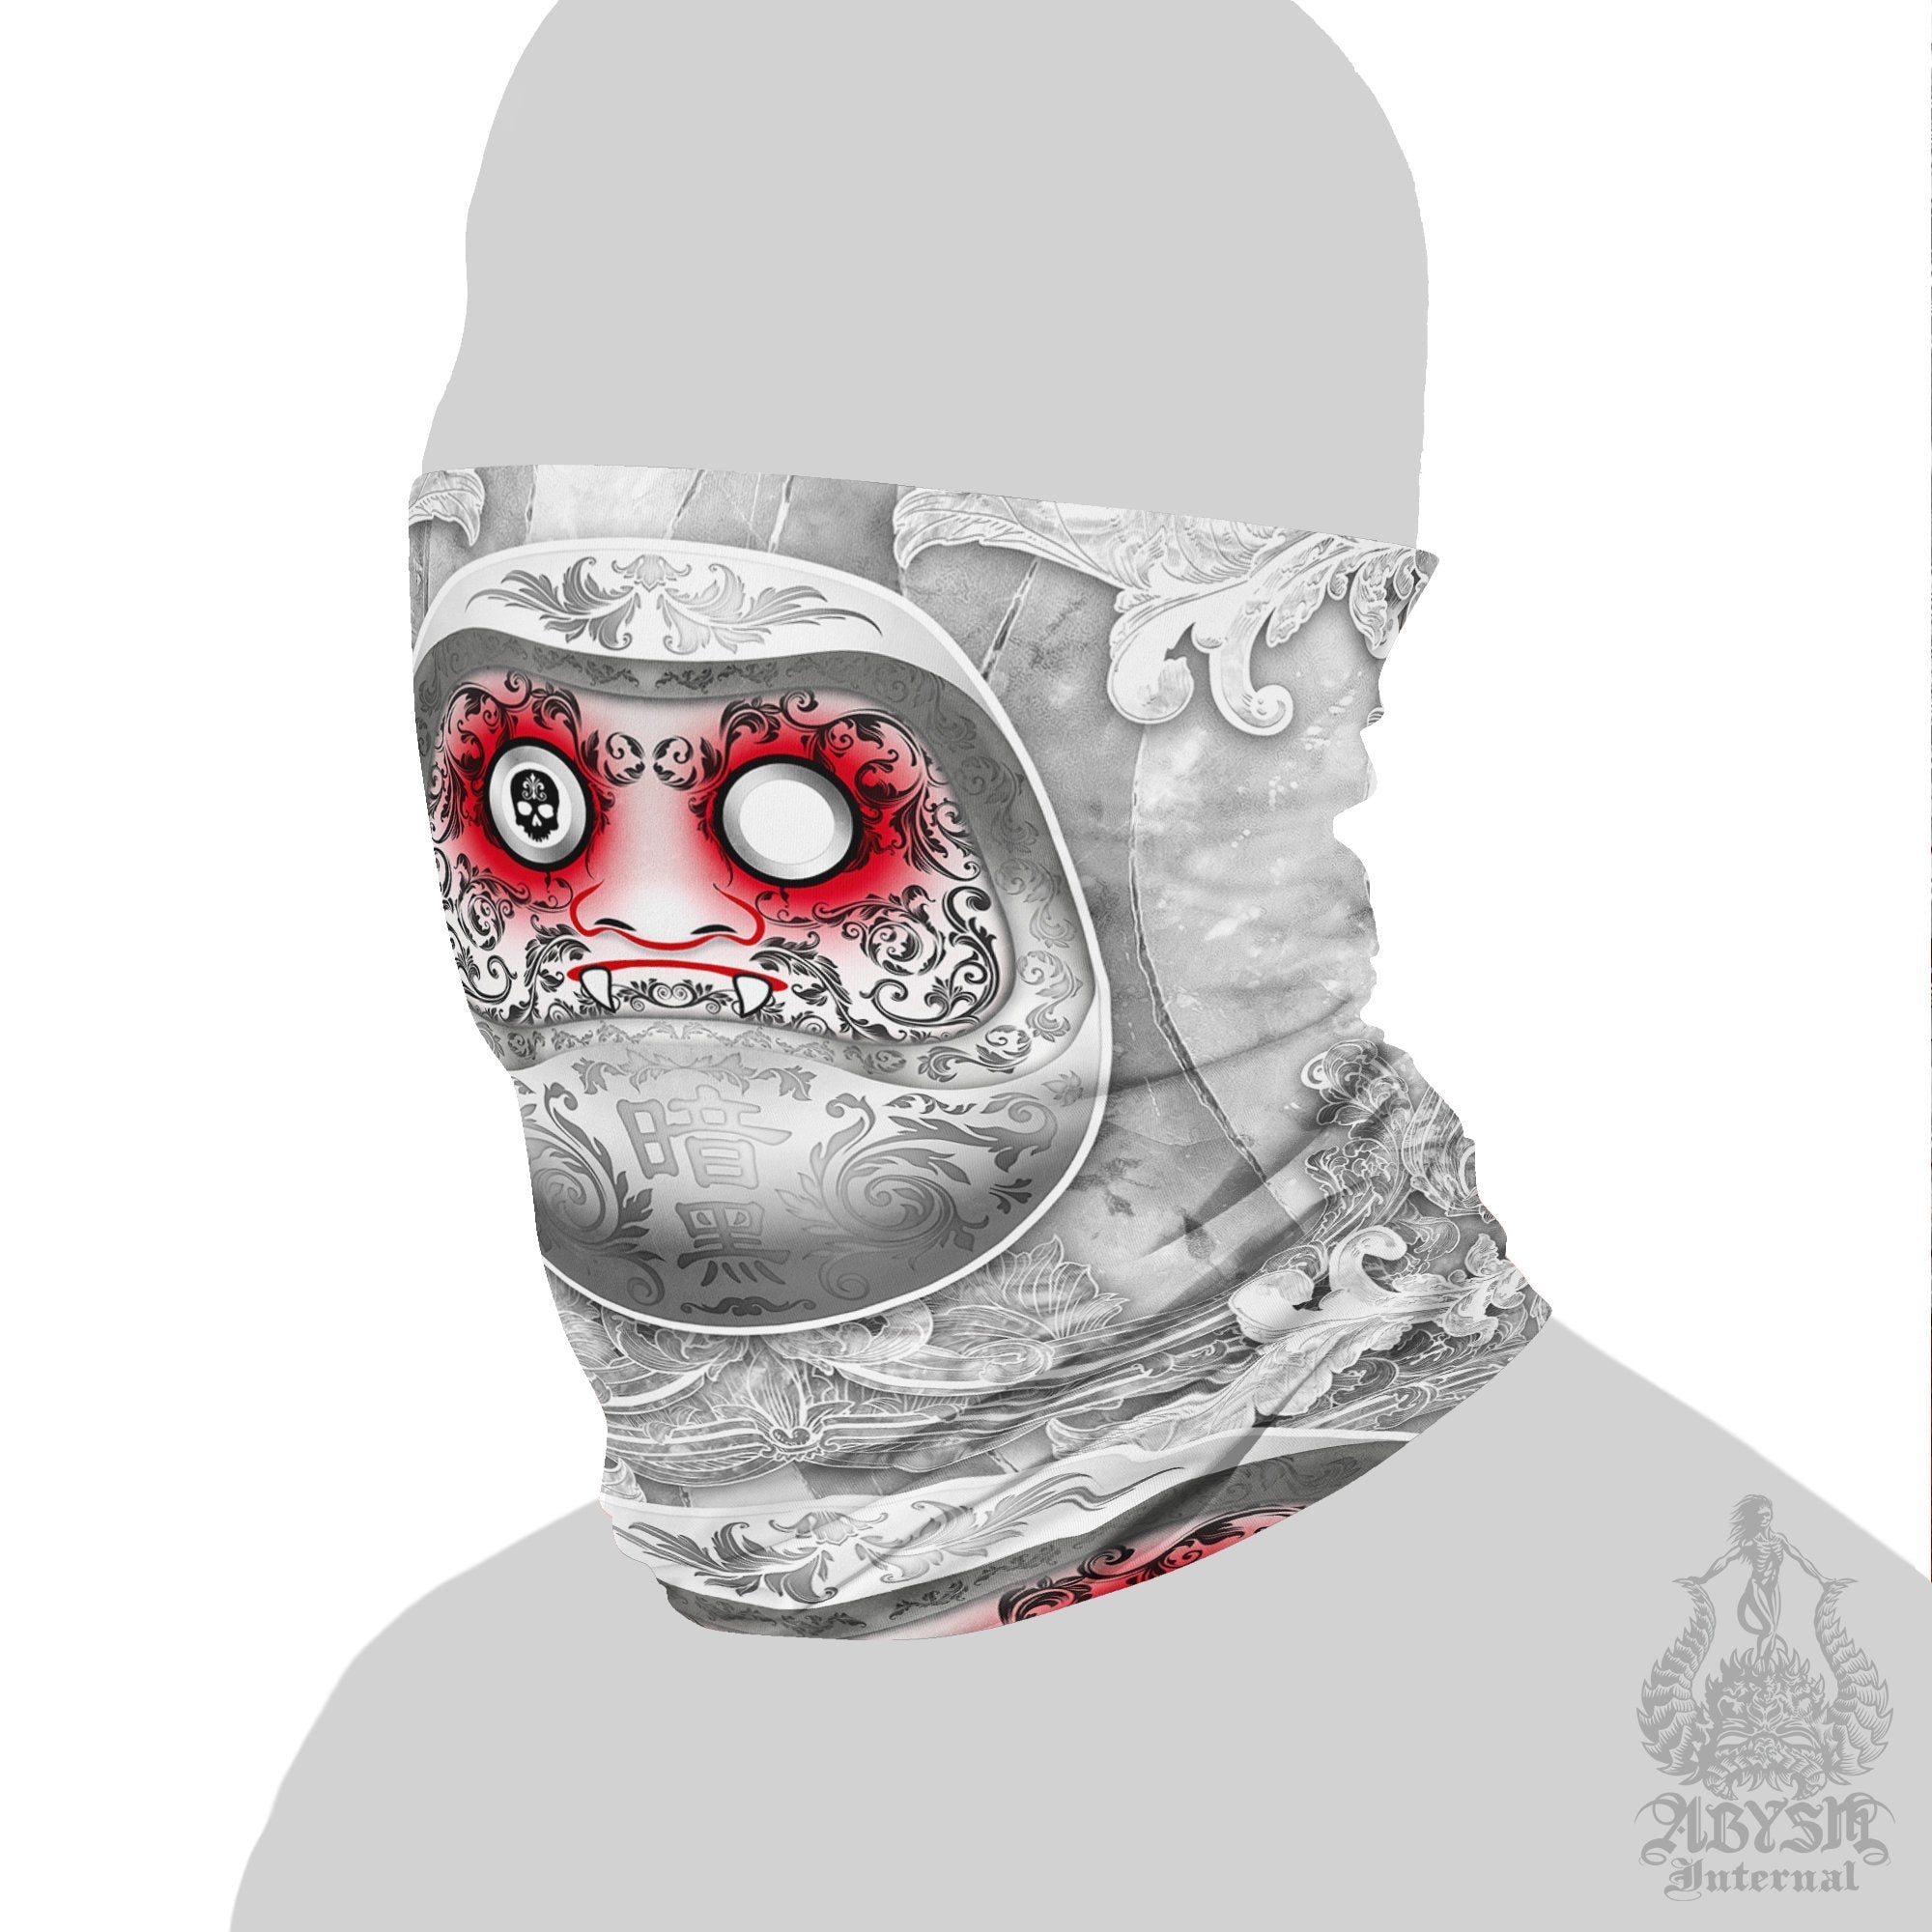 Japanese Neck Gaiter, Face Mask, Head Covering, Daruma, Funny Anime Style Outfit - White Goth - Abysm Internal